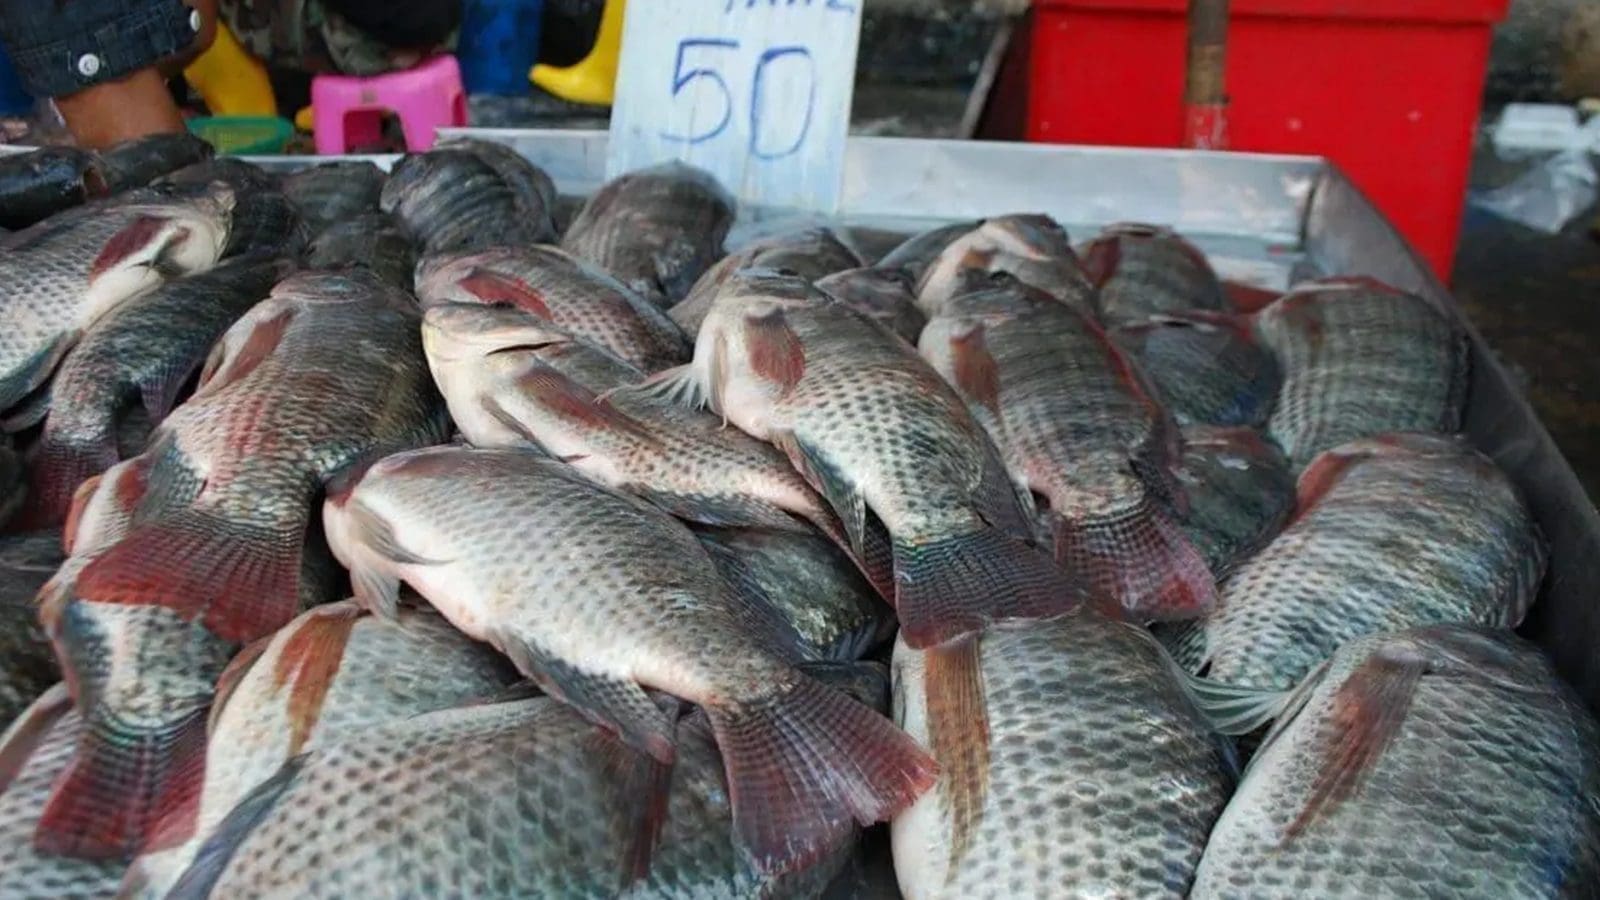 Kenya calls for harmonized legal framework to promote aquaculture trade in East Africa